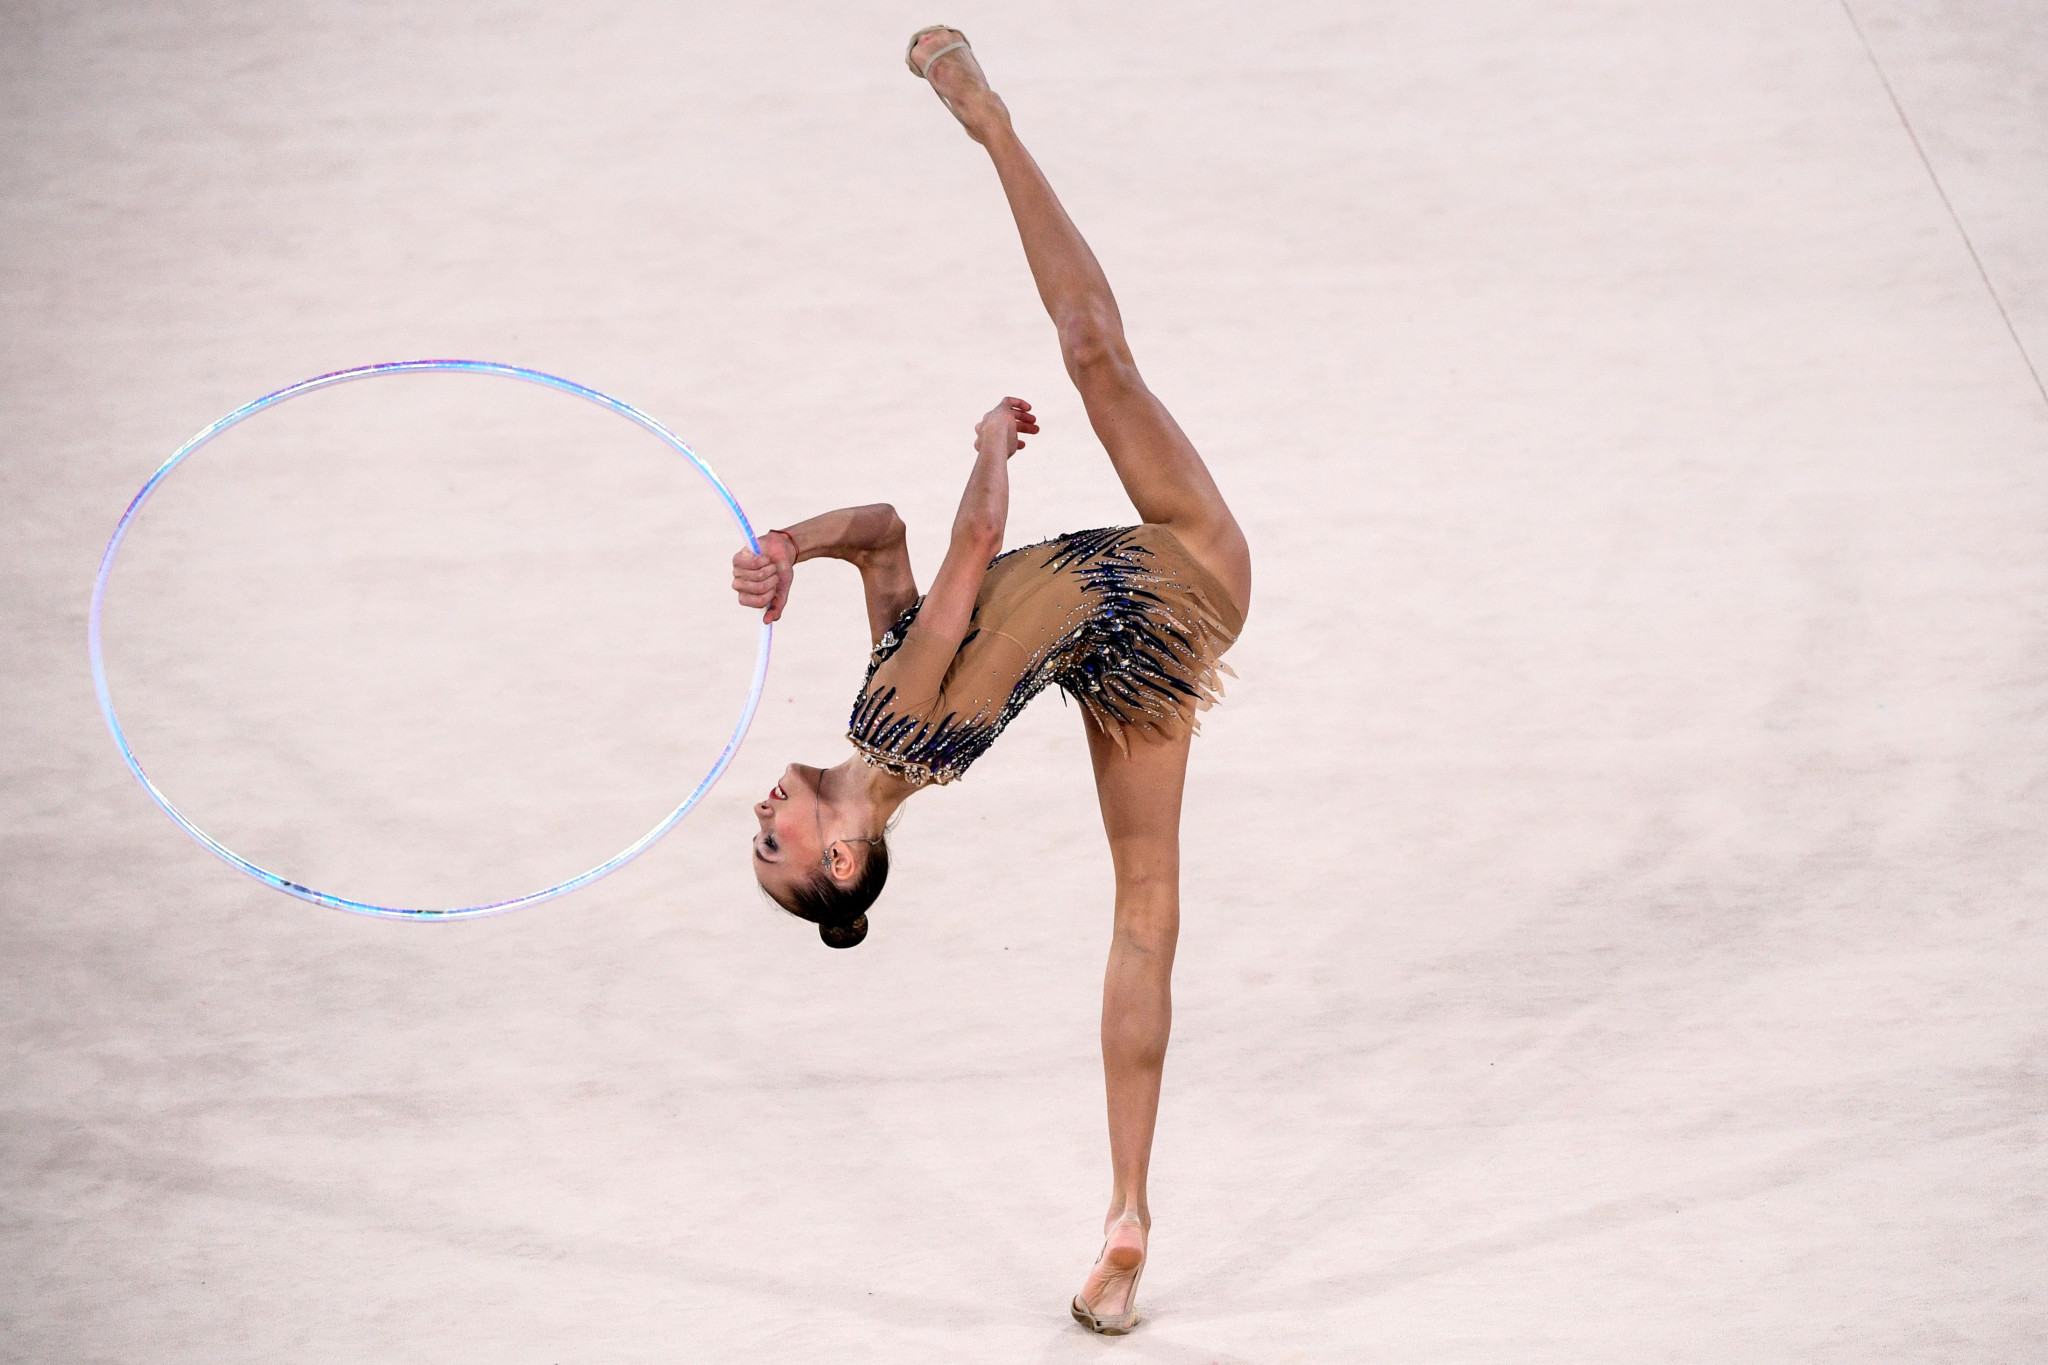 Russia will not attend the European Rhythmic Gymnastics Championships in November ©Getty Images